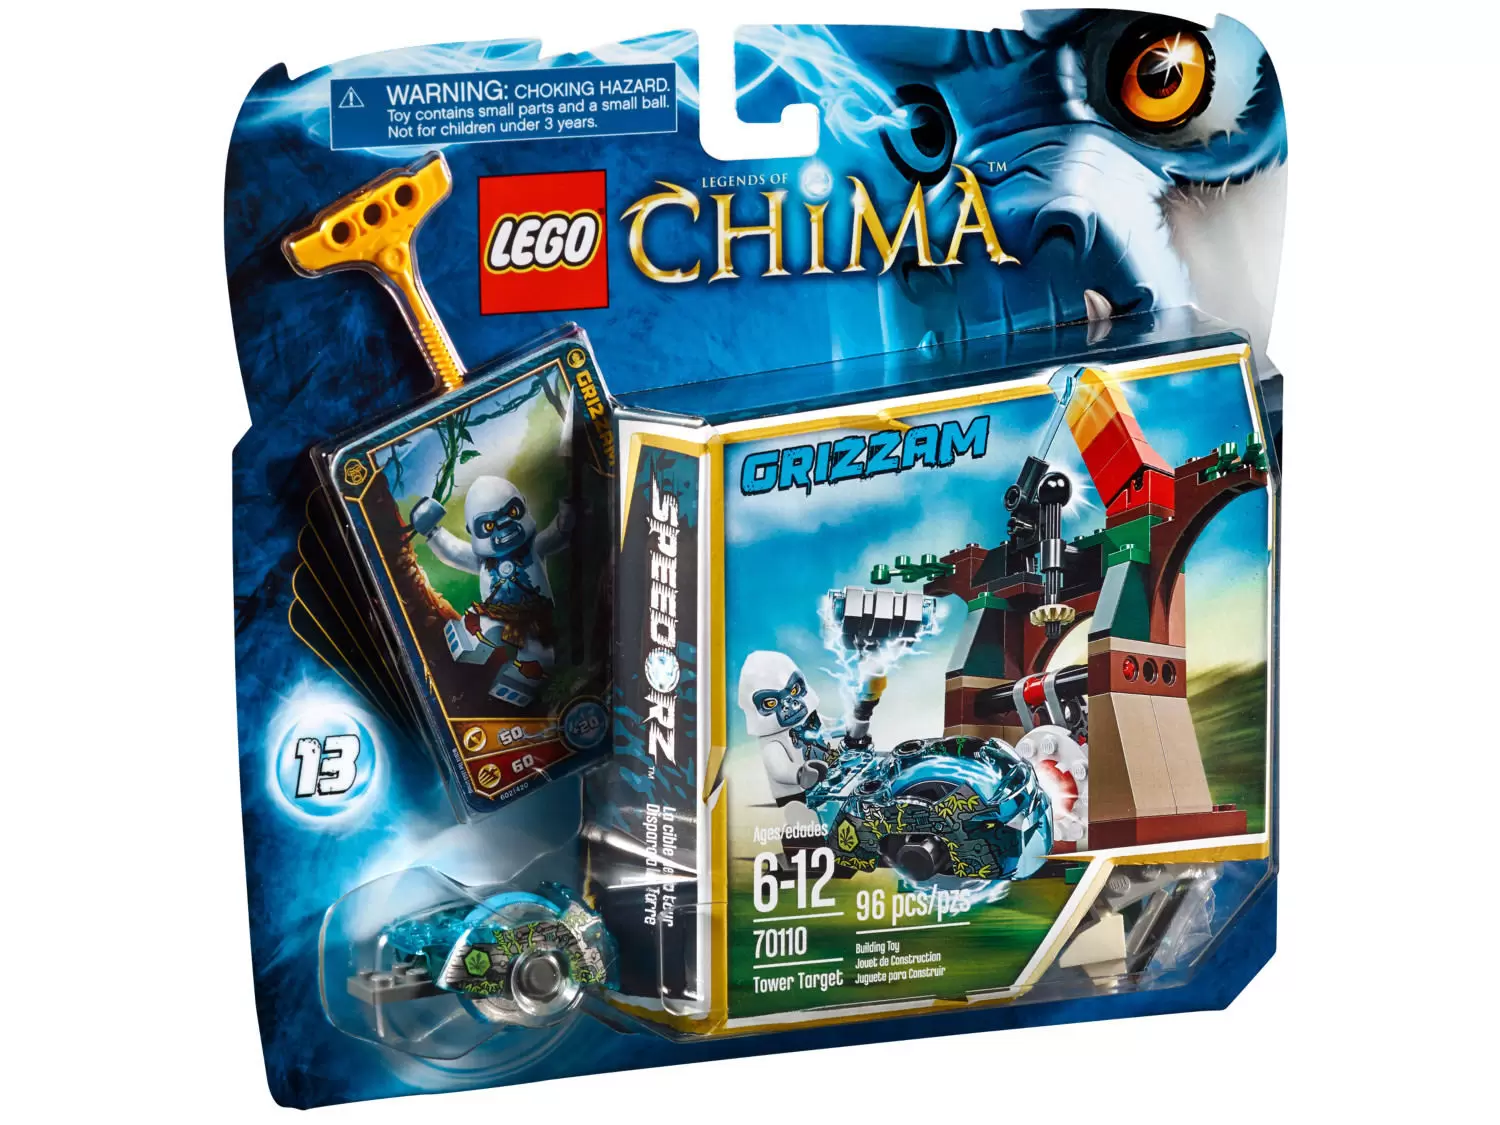 LEGO Legends of Chima - Tower Target